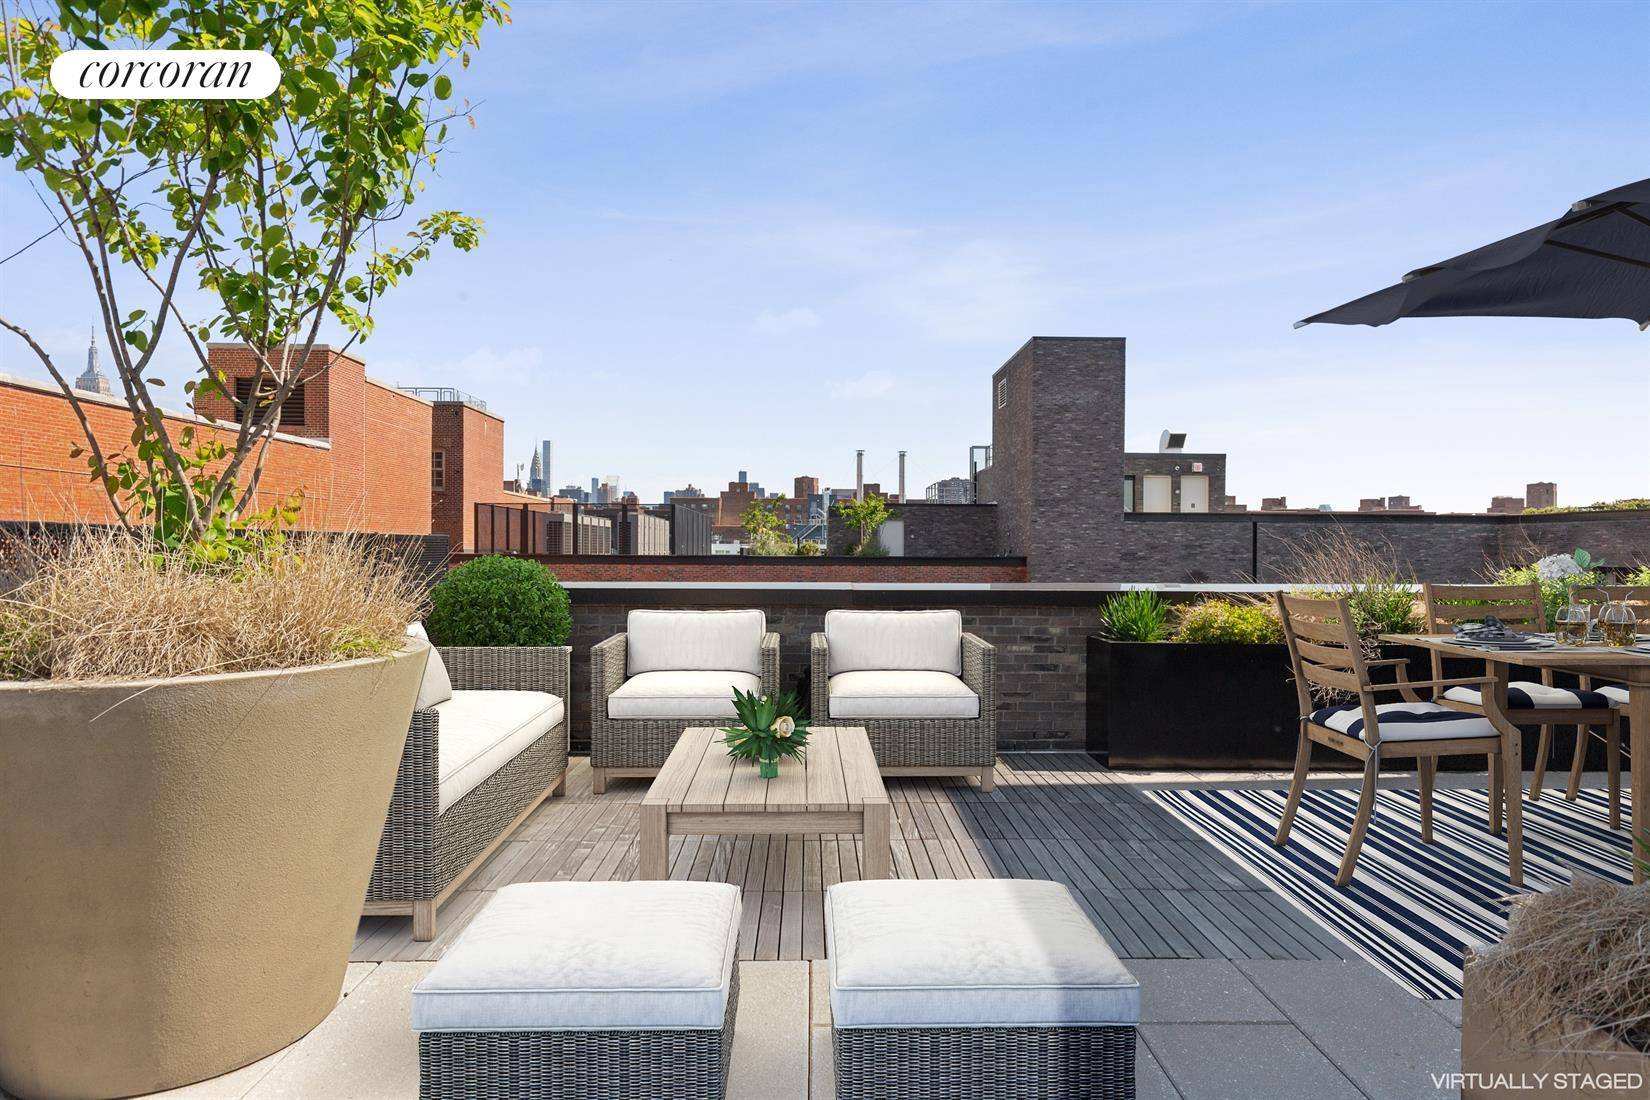 Extraordinary 3BR 2. 5BTH 2000 sq ft Penthouse at the sought after Steiner East Condominium at 438 East 12th Street in the hub of the East Village.